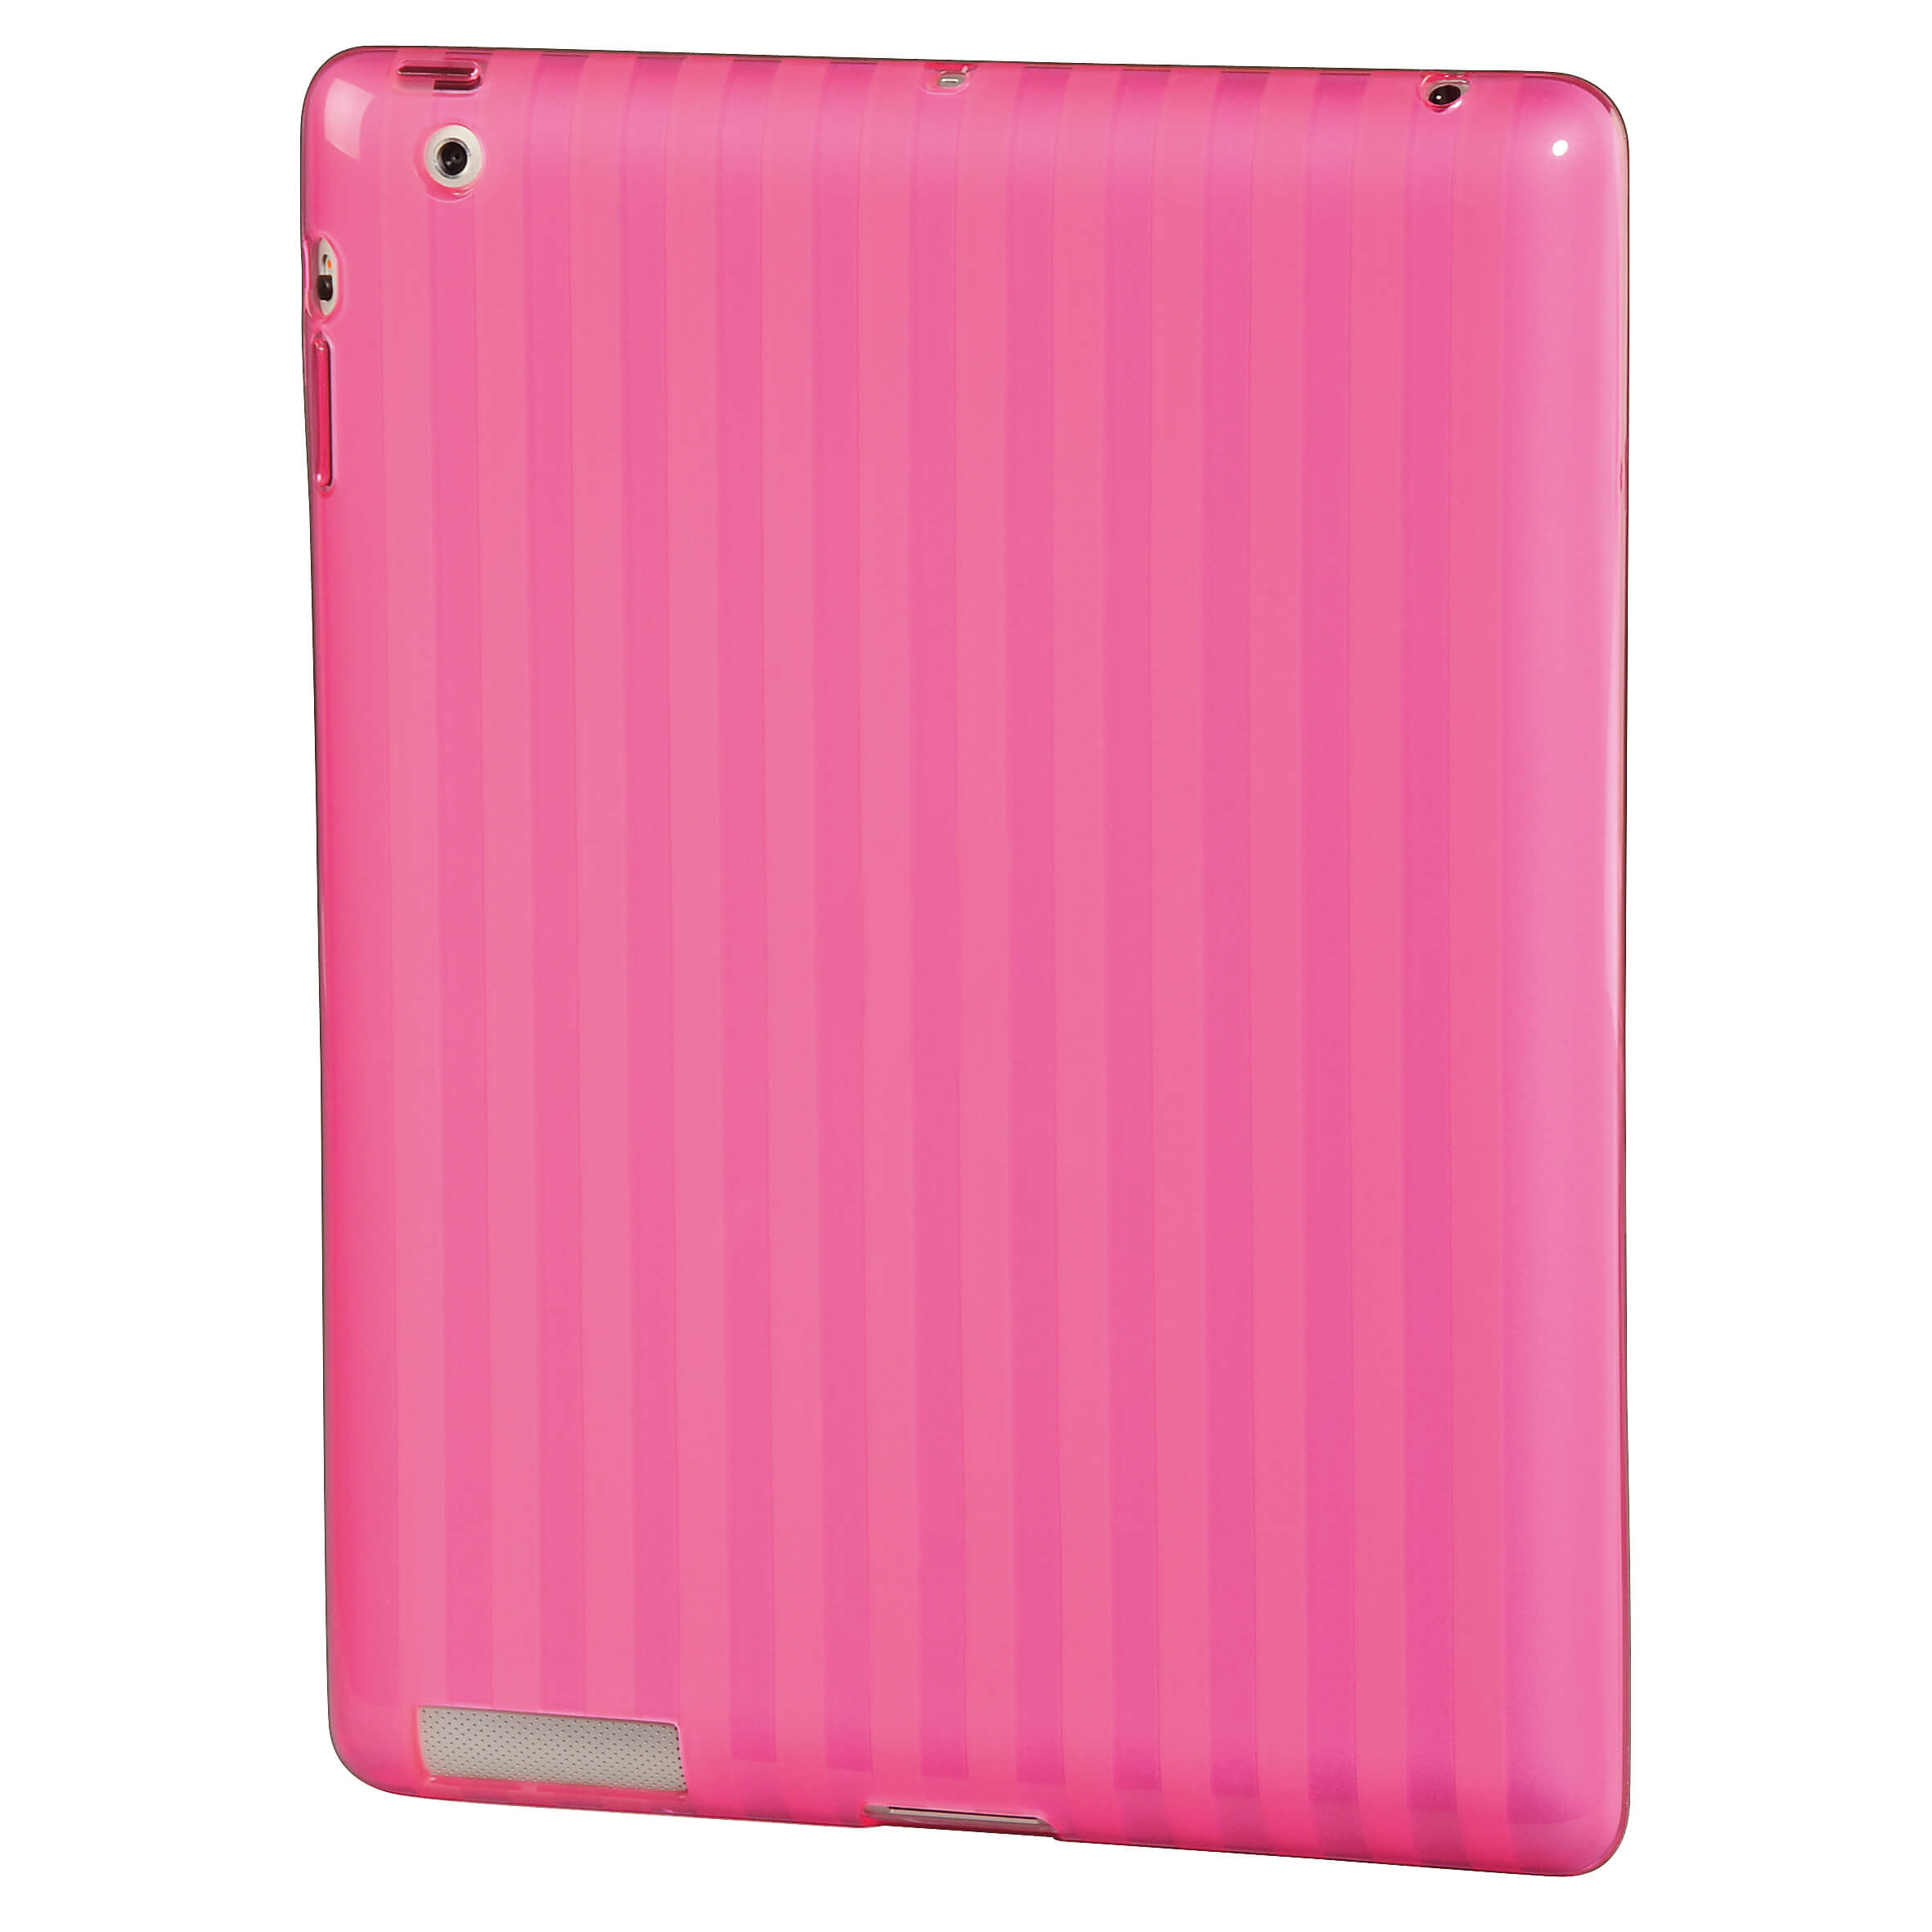 Stripes Cover for iPad 2/3rd/ 4th Generation, pink